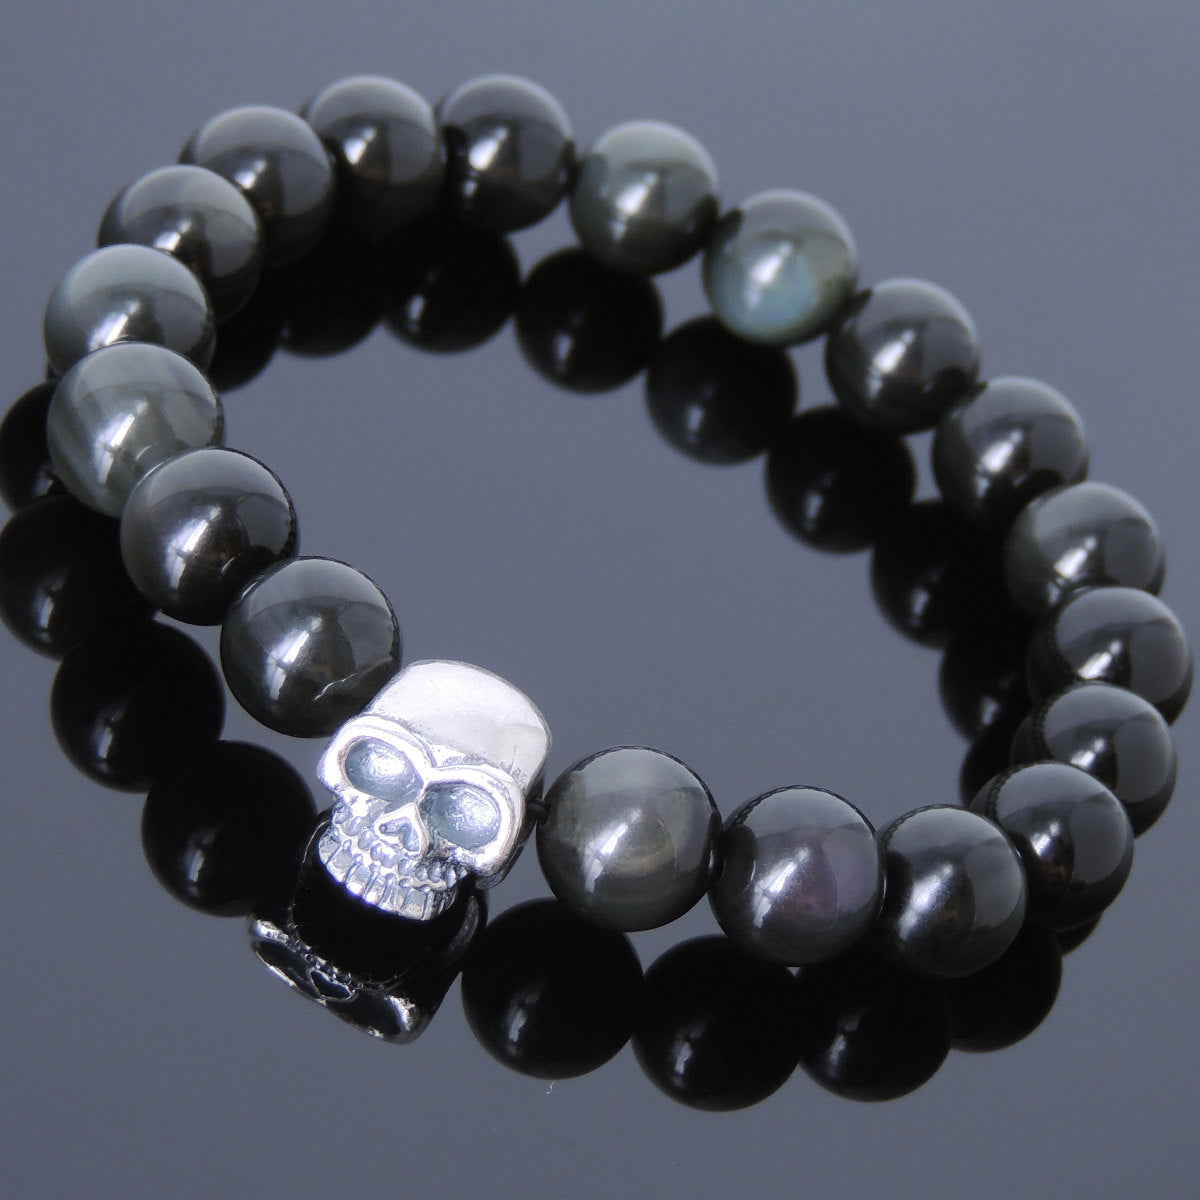 10mm Rainbow Black Obsidian Healing Gemstone Bracelet with S925 Sterling Silver Skull Protection Charm - Handmade by Gem & Silver BR606